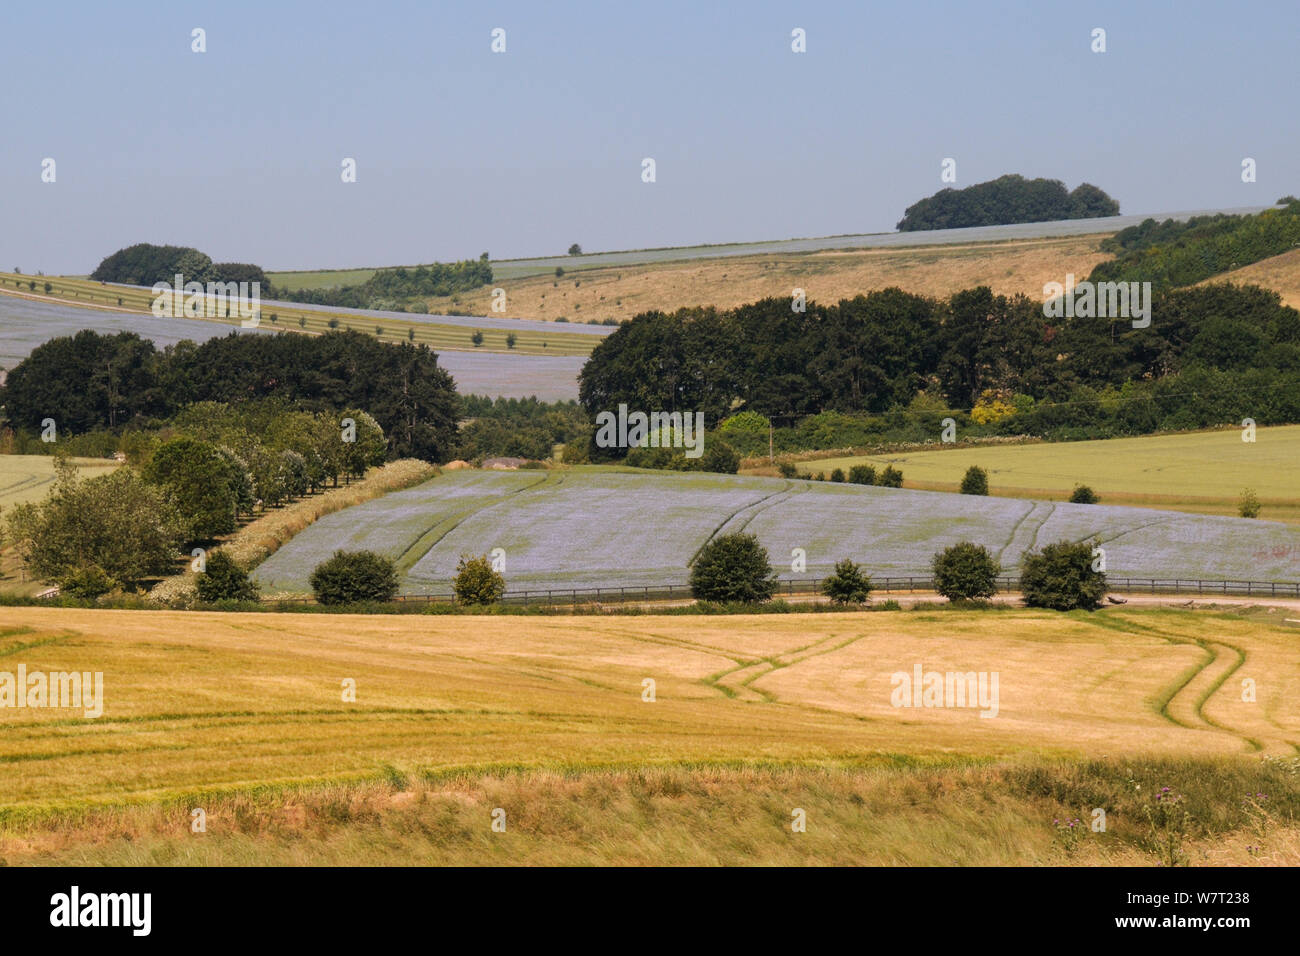 Agricultural landscape with mix of ripening Barley (Hordeum vulgare), Wheat (Triticum aestivum) and flowering Linseed (Linum usitatissimum) crops, tree belts and hillside pastureland, Marlborough Downs, Wiltshire, UK, July 2013. Stock Photo